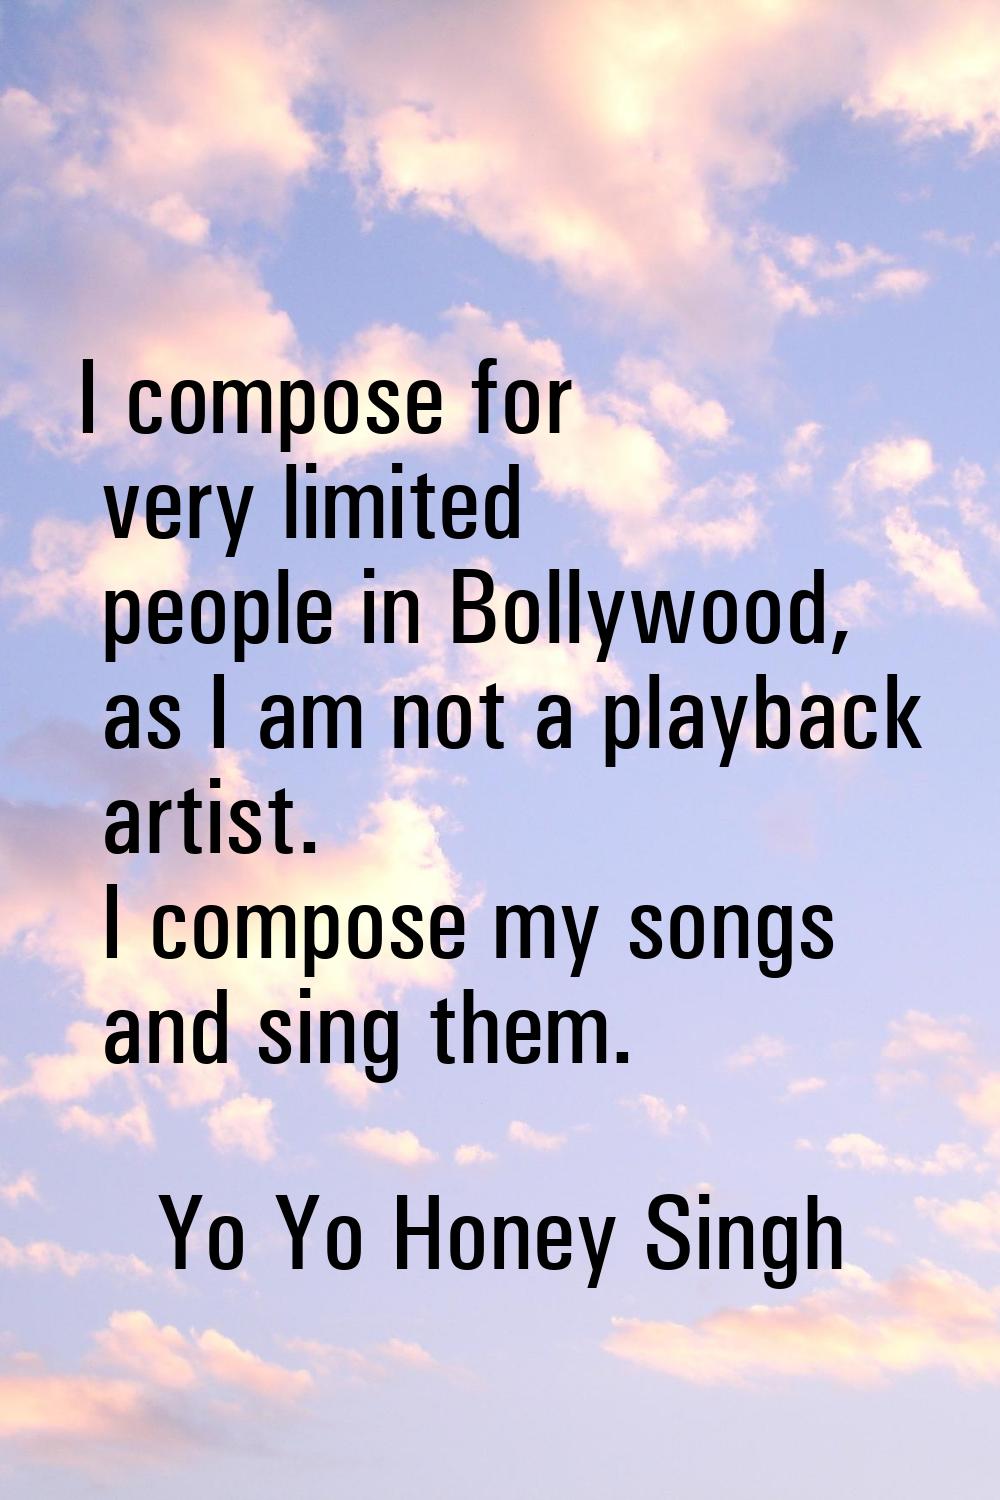 I compose for very limited people in Bollywood, as I am not a playback artist. I compose my songs a